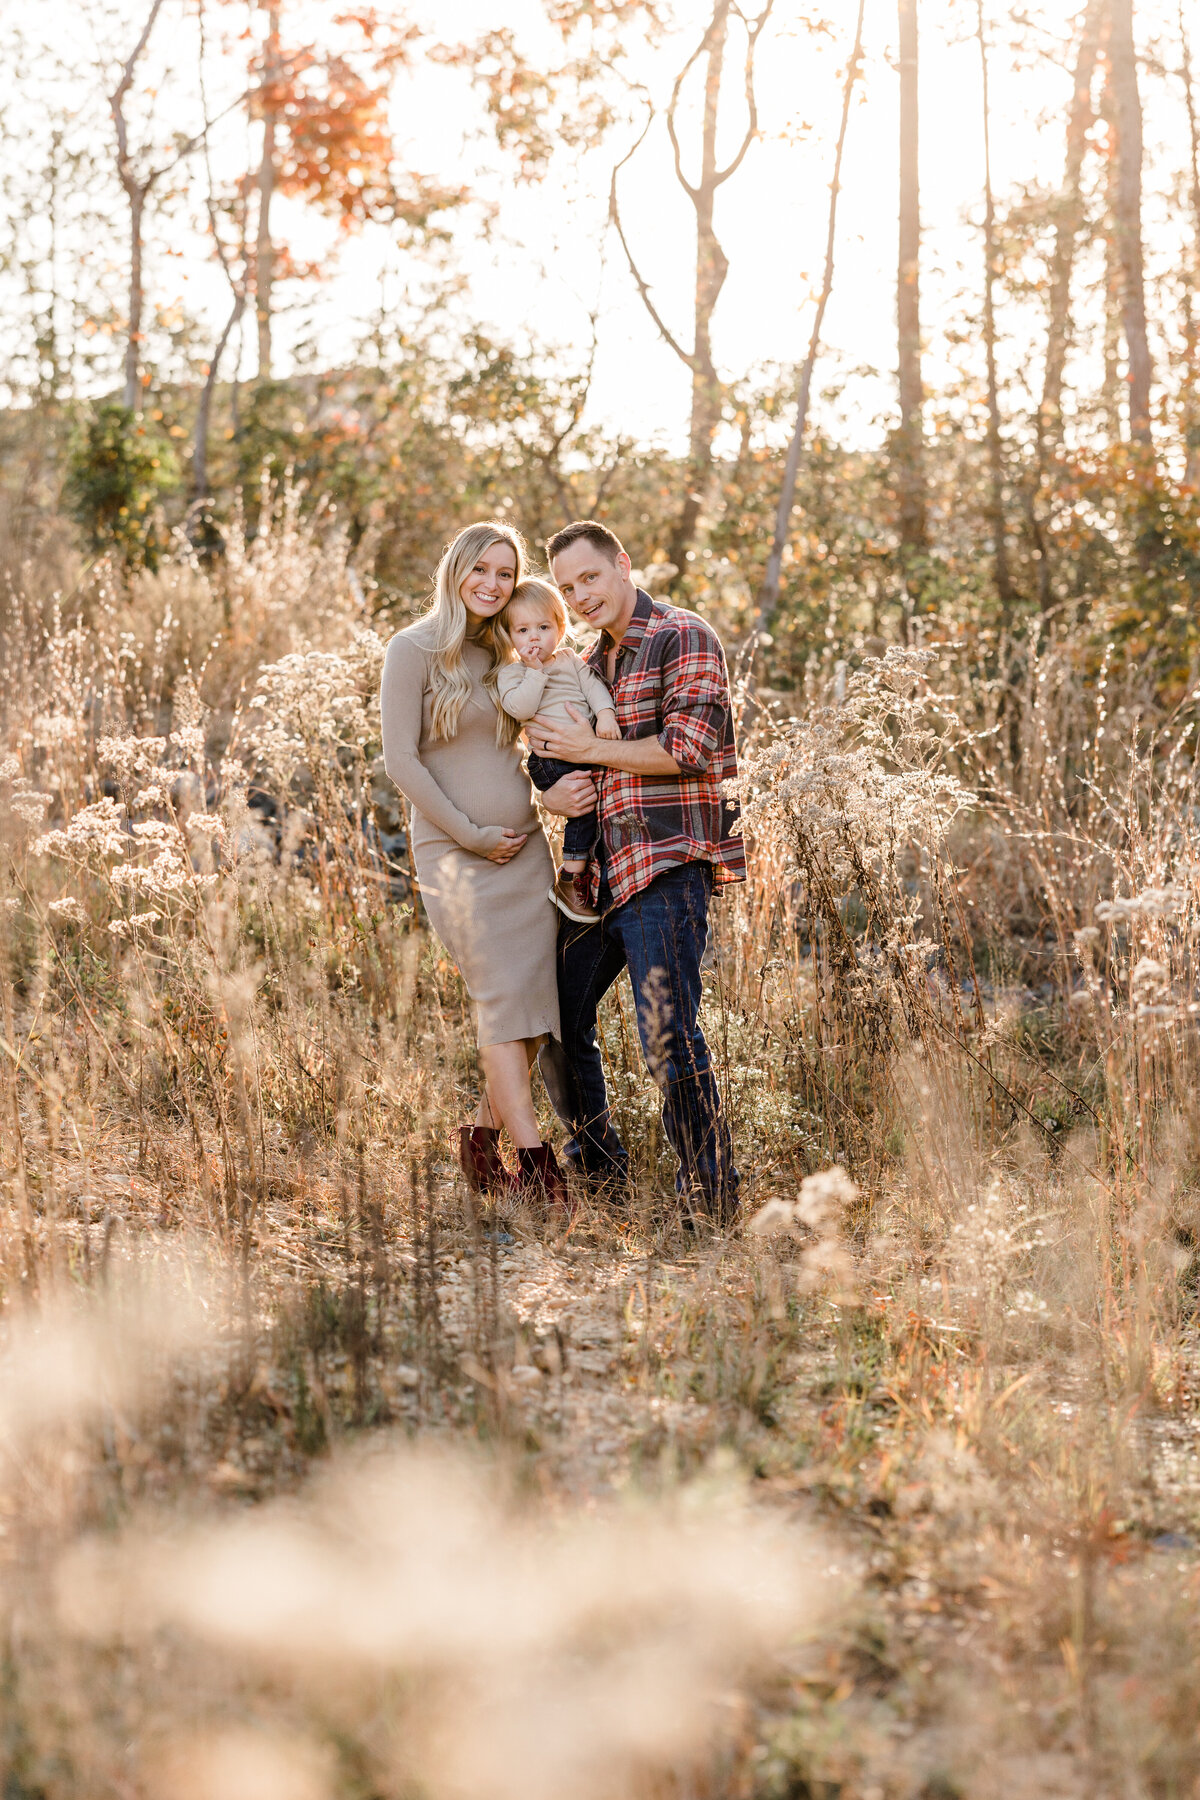 Kait & Dave Gender Reveal - Taylor'd Southern Events - Maryland Photographer -1853